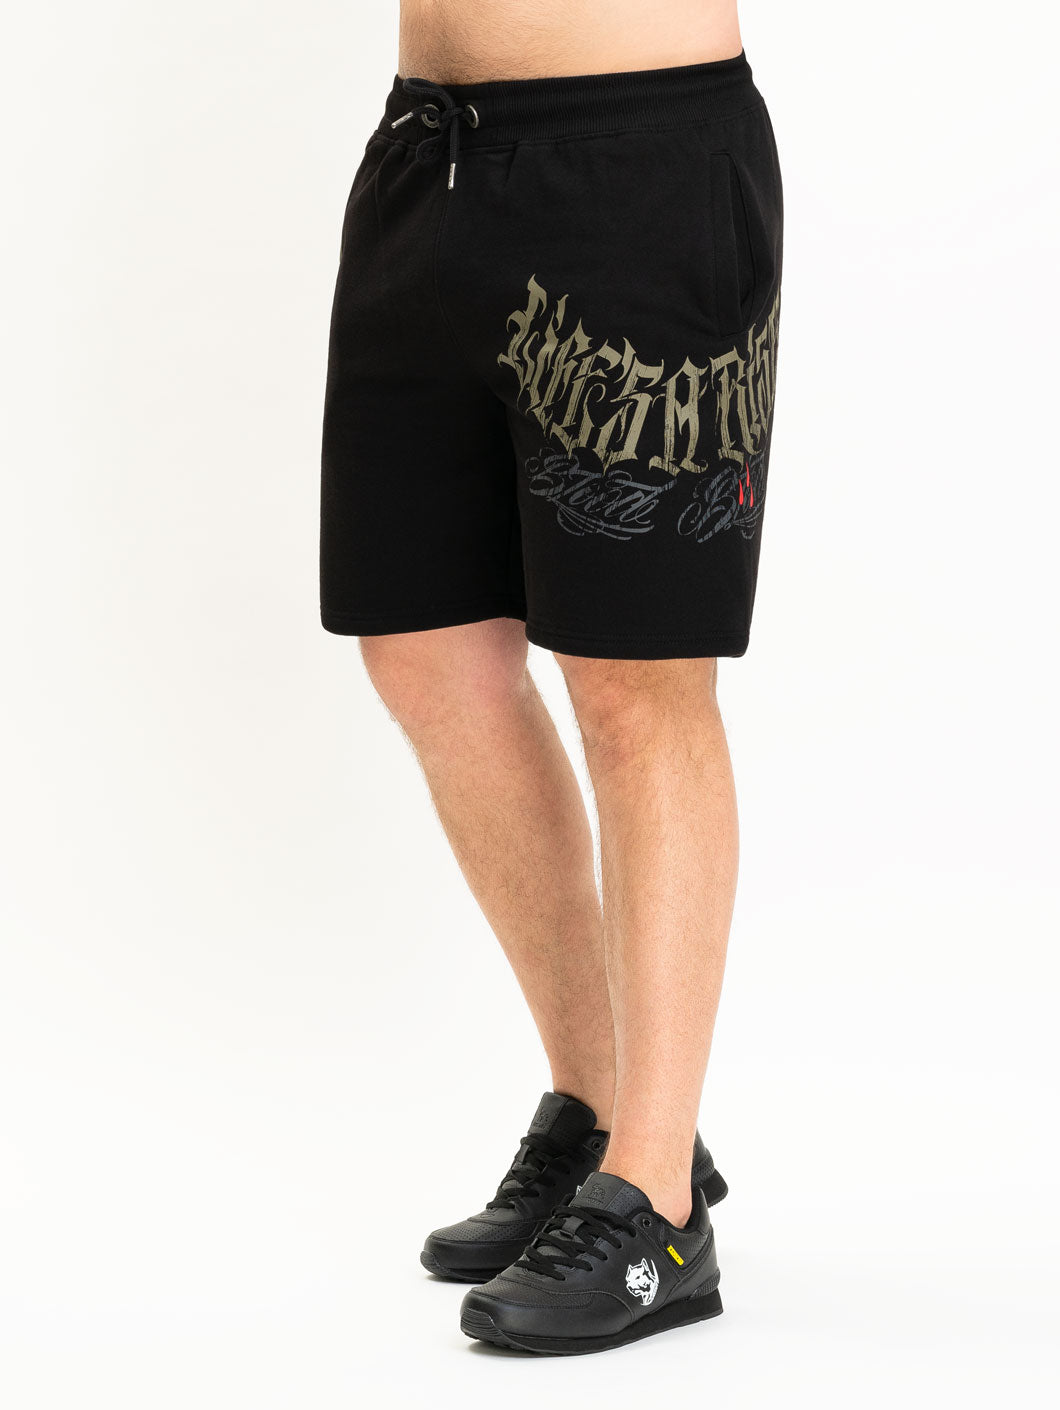 Blood In Blood Out Miembros Sweatshorts - 0